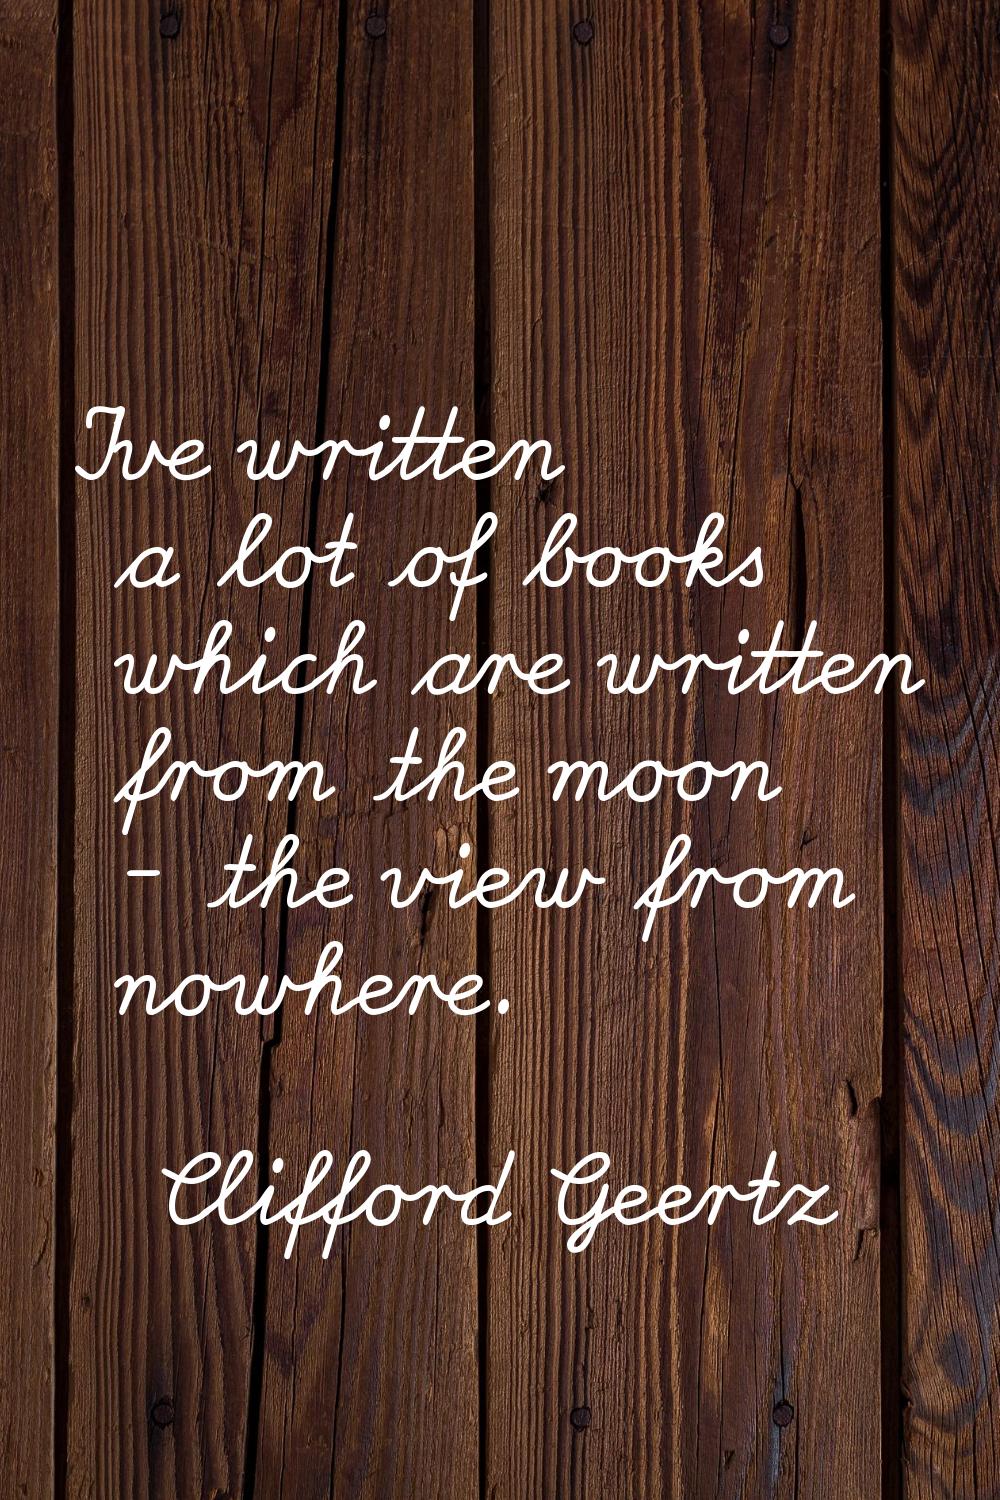 I've written a lot of books which are written from the moon - the view from nowhere.